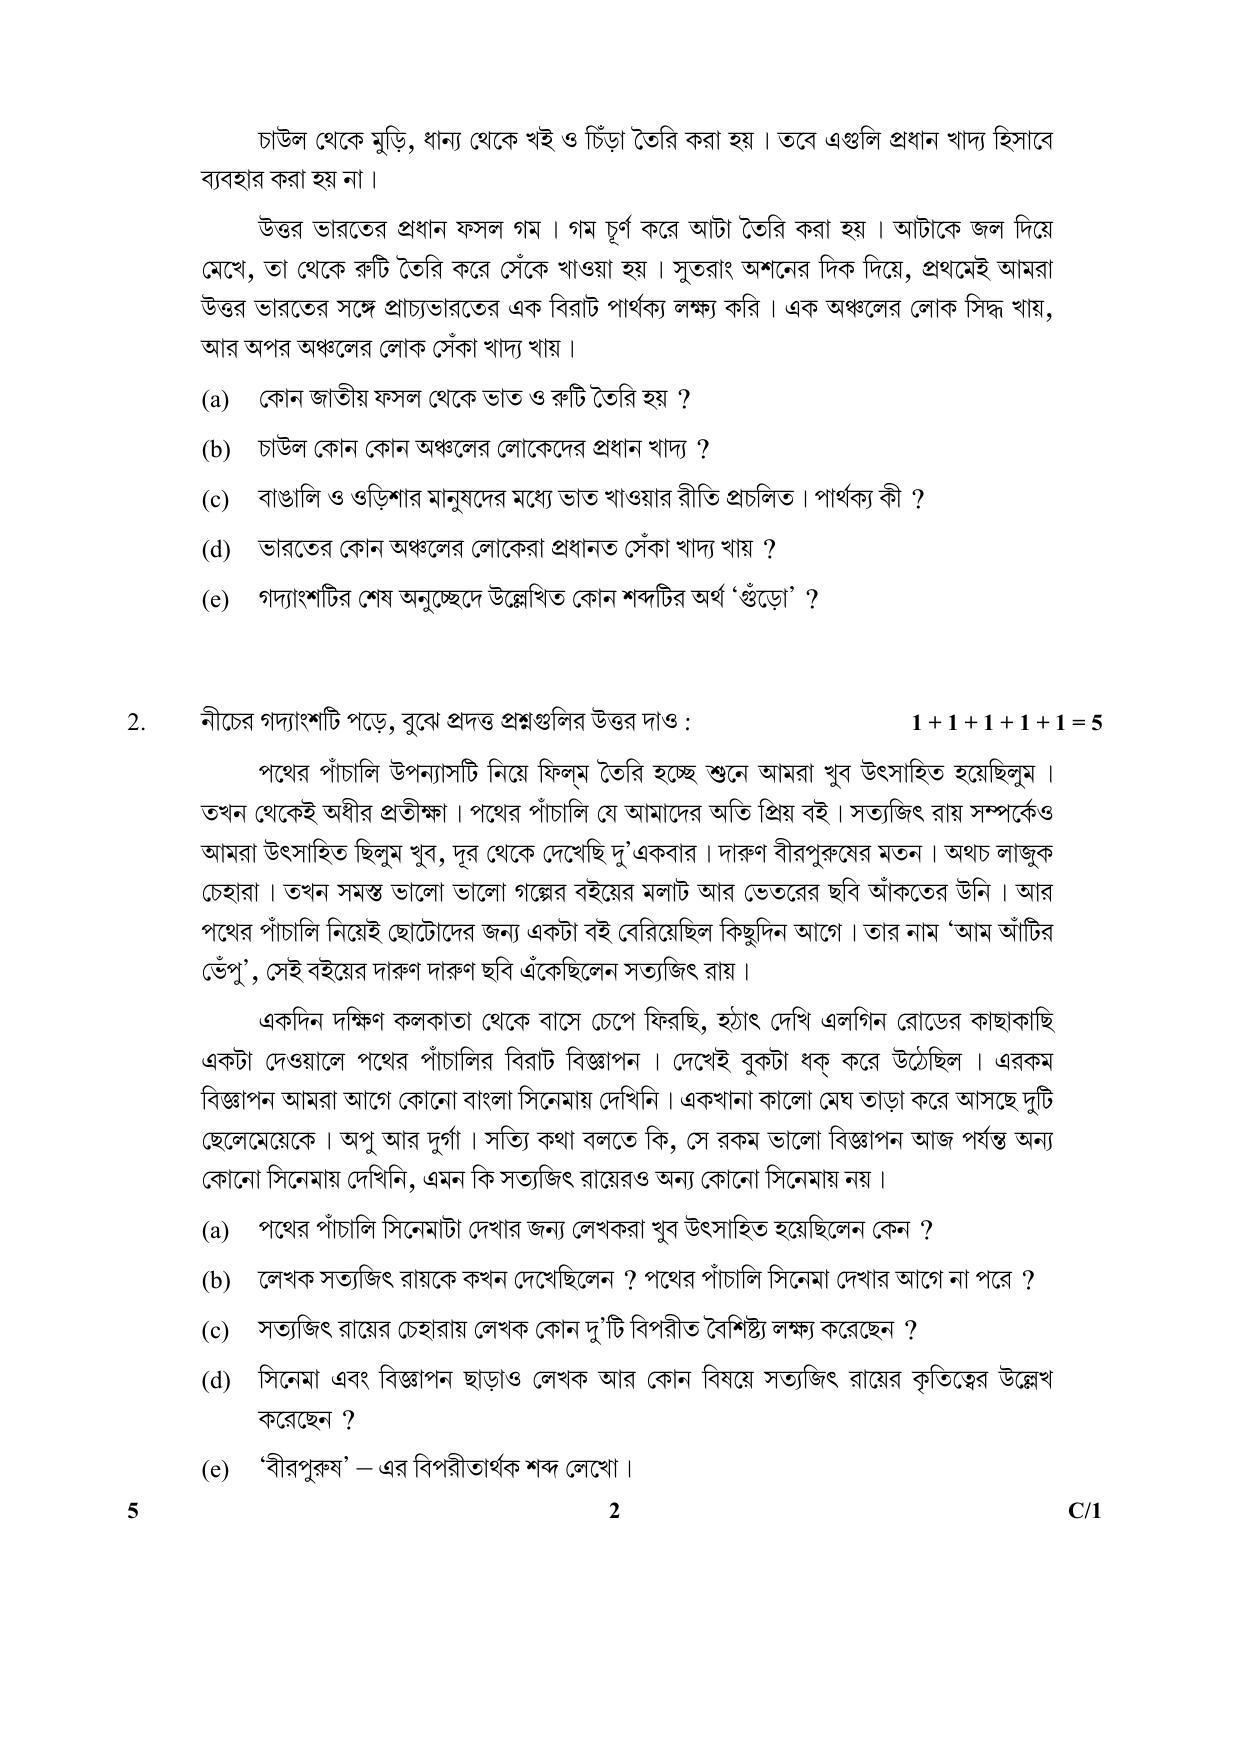 CBSE Class 12 5 (Bengali) 2018 Compartment Question Paper - Page 2